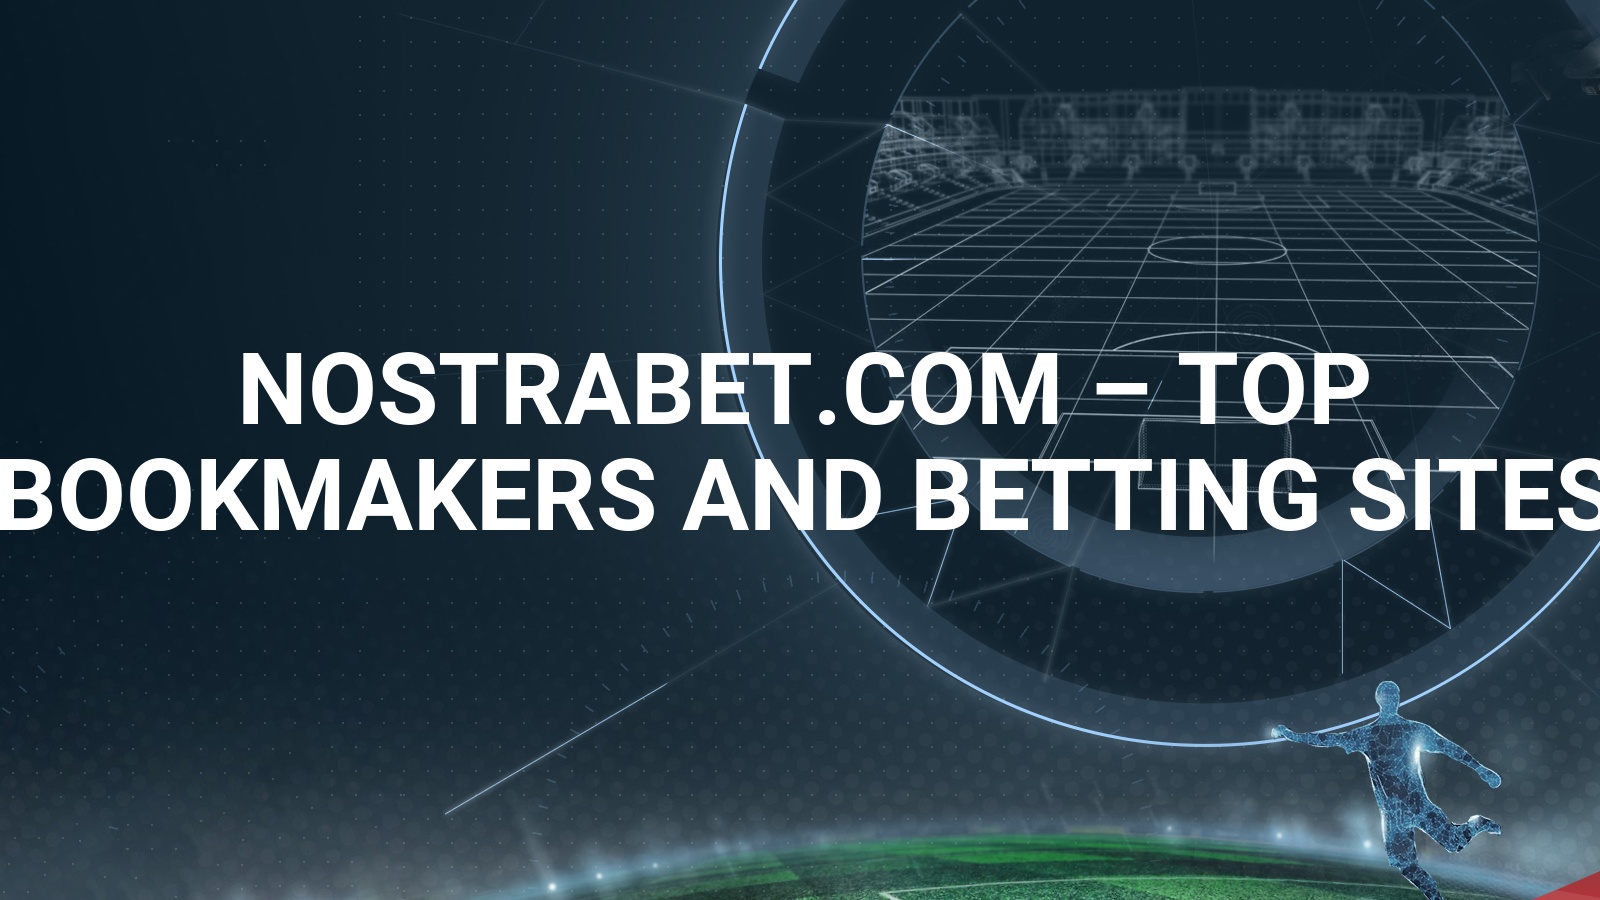 Who Else Wants To Know The Mystery Behind asian bookies, asian bookmakers, online betting malaysia, asian betting sites, best asian bookmakers, asian sports bookmakers, sports betting malaysia, online sports betting malaysia, singapore online sportsbook?